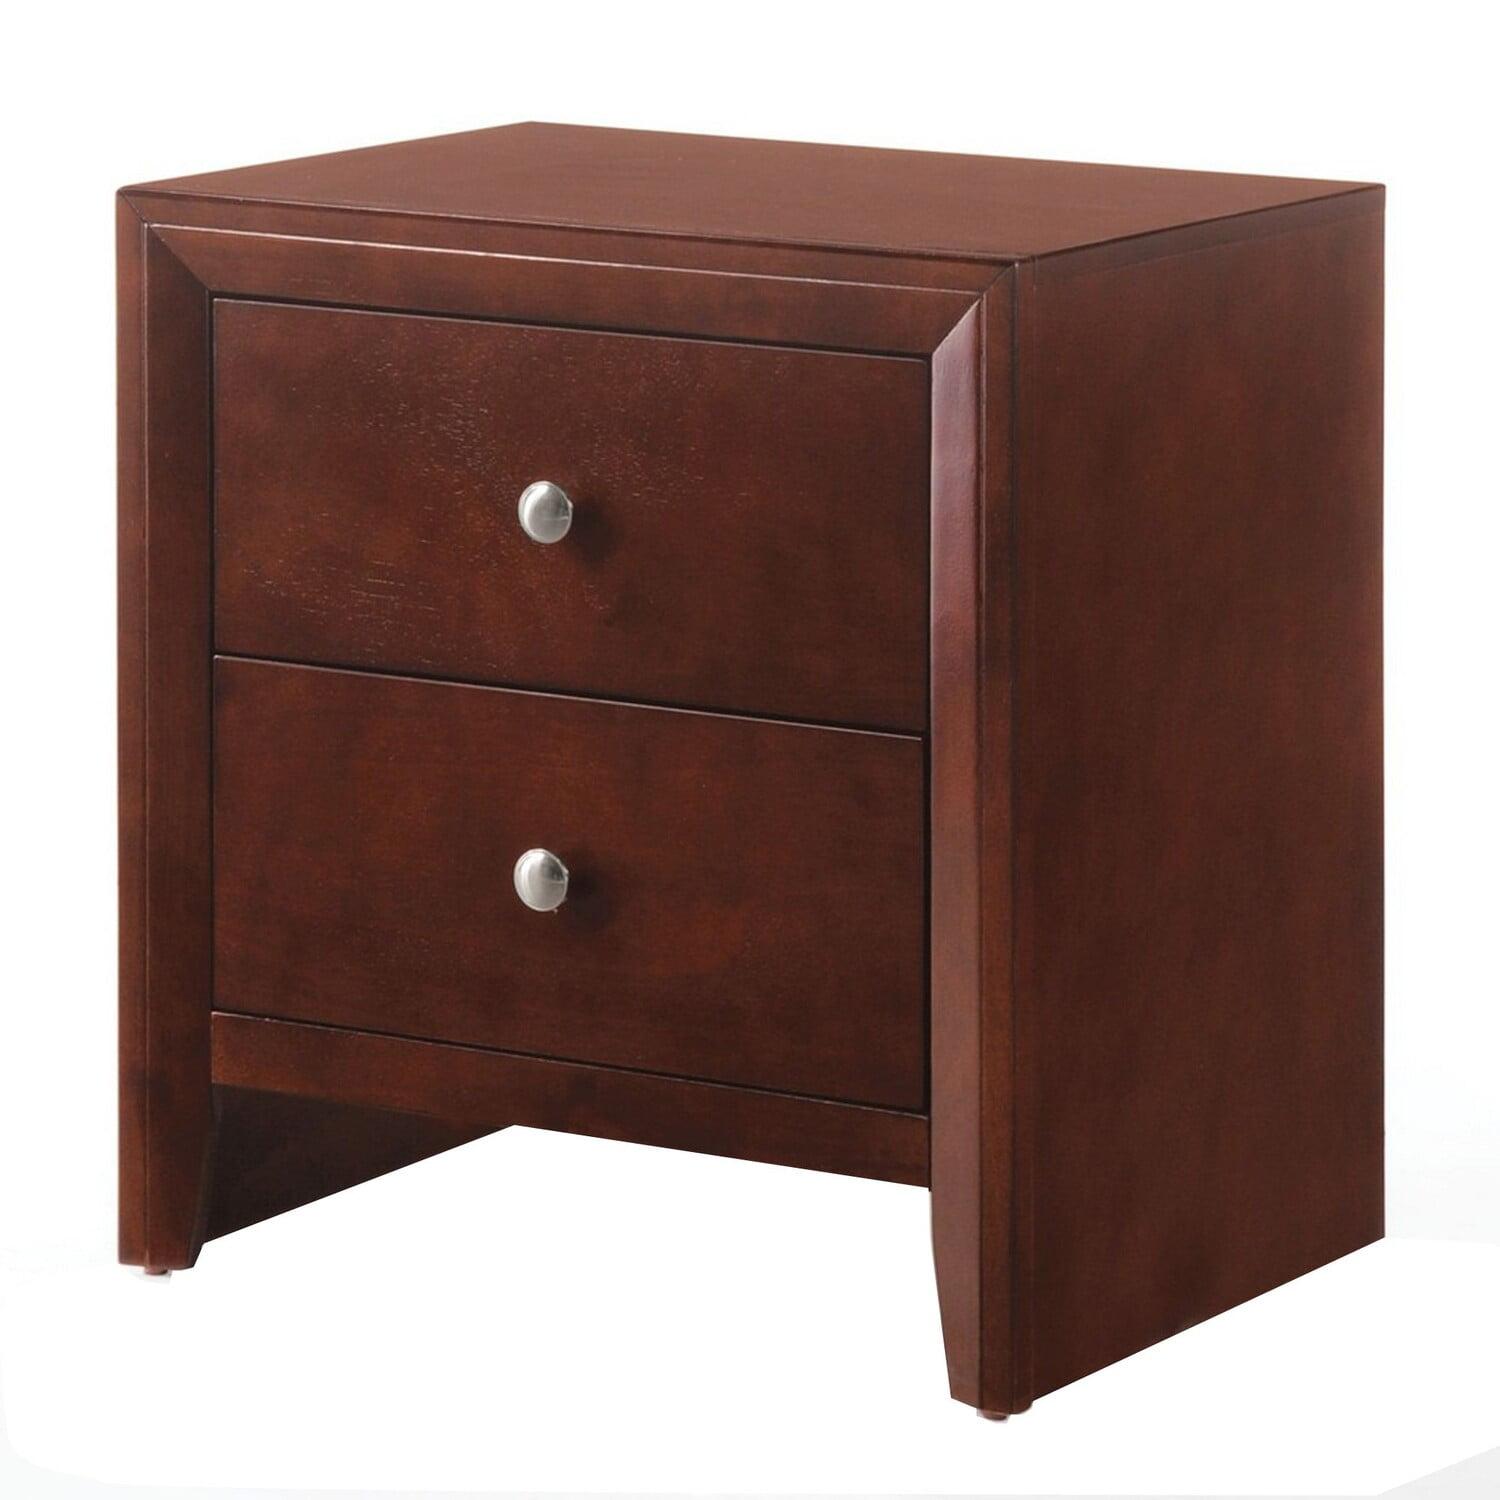 Cherry Brown Solid Wood Nightstand with Brushed Nickel Knobs